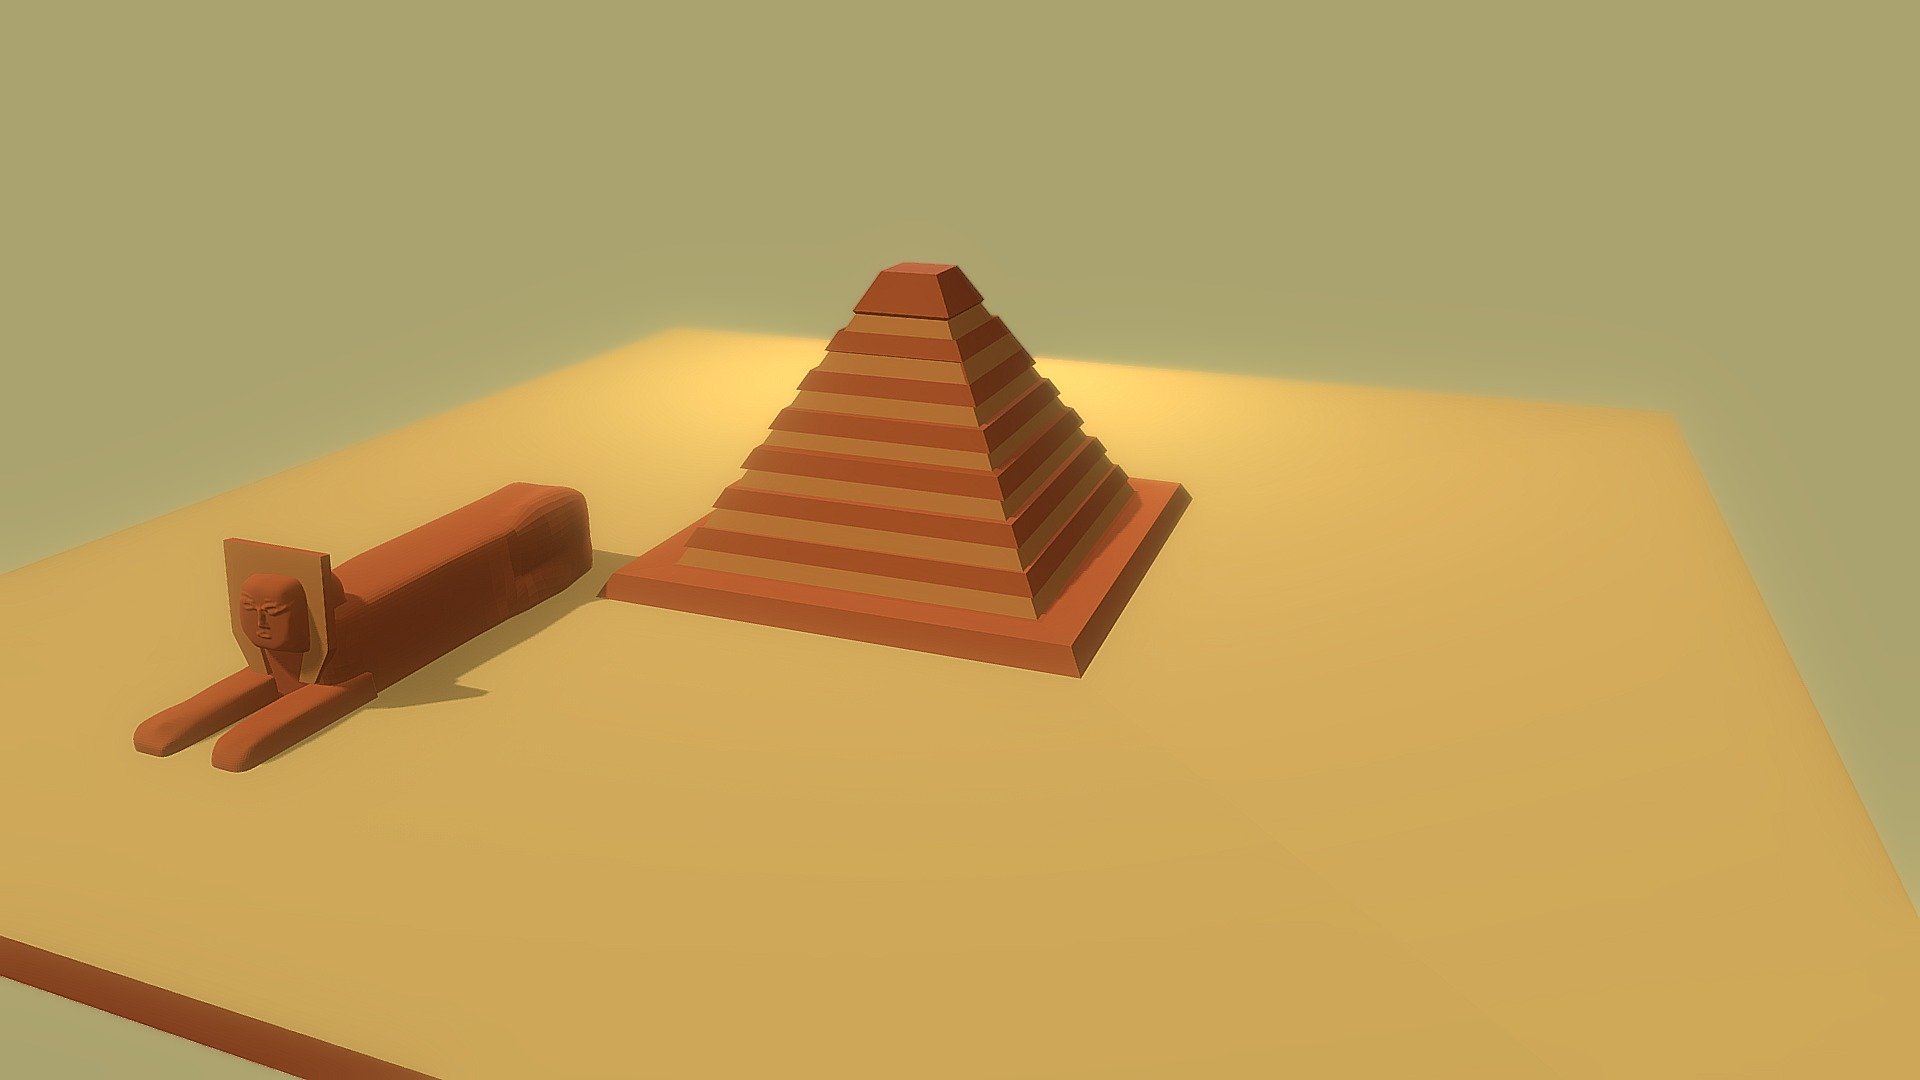 "Pyramid and the Sphinx"